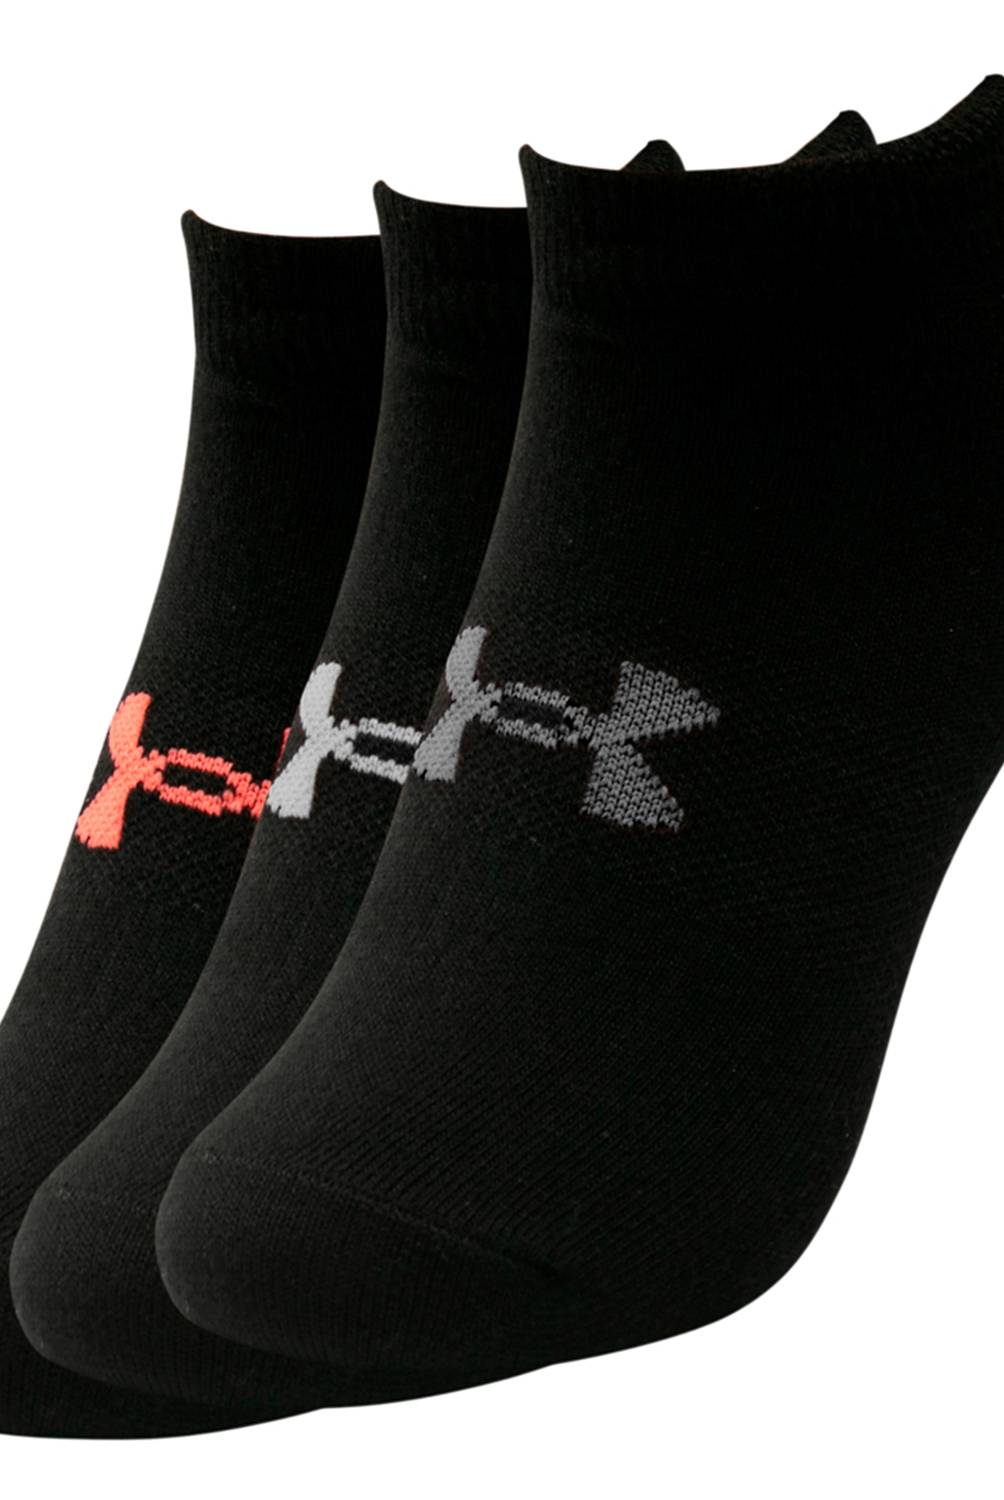 UNDER ARMOUR - Pack De 6 Calcetines Deportivos Mujer